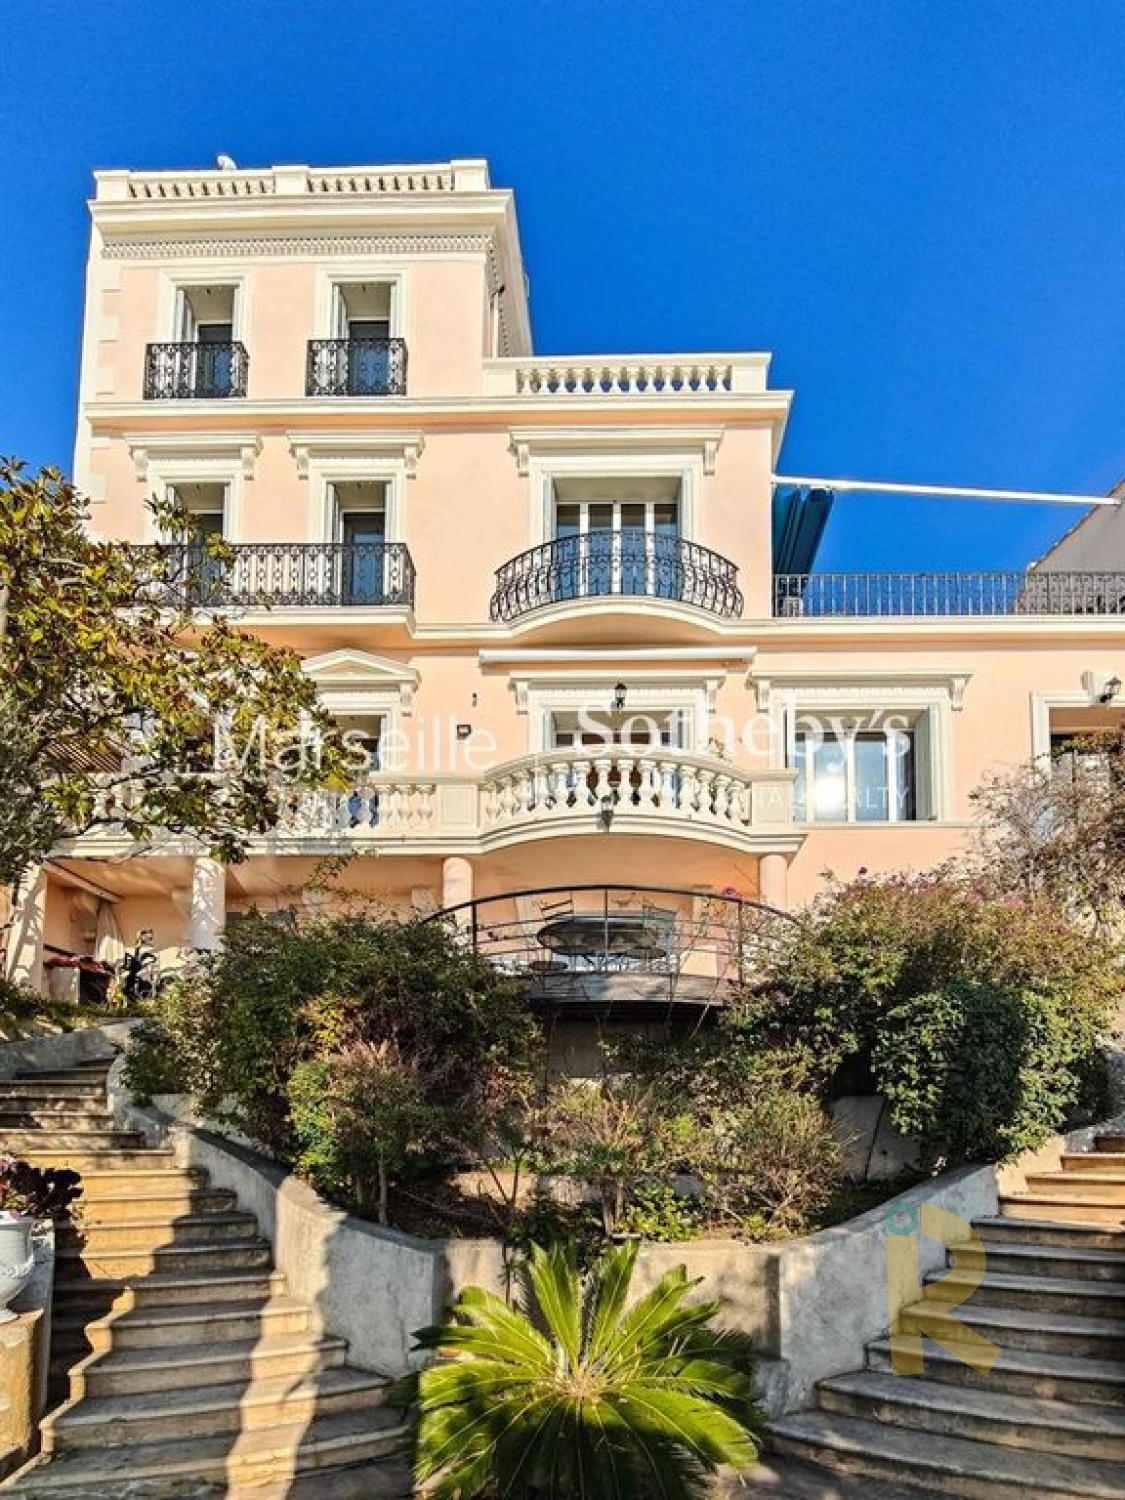 8-room-luxury-townhouse-for-sale-in-marseille-france-big-4